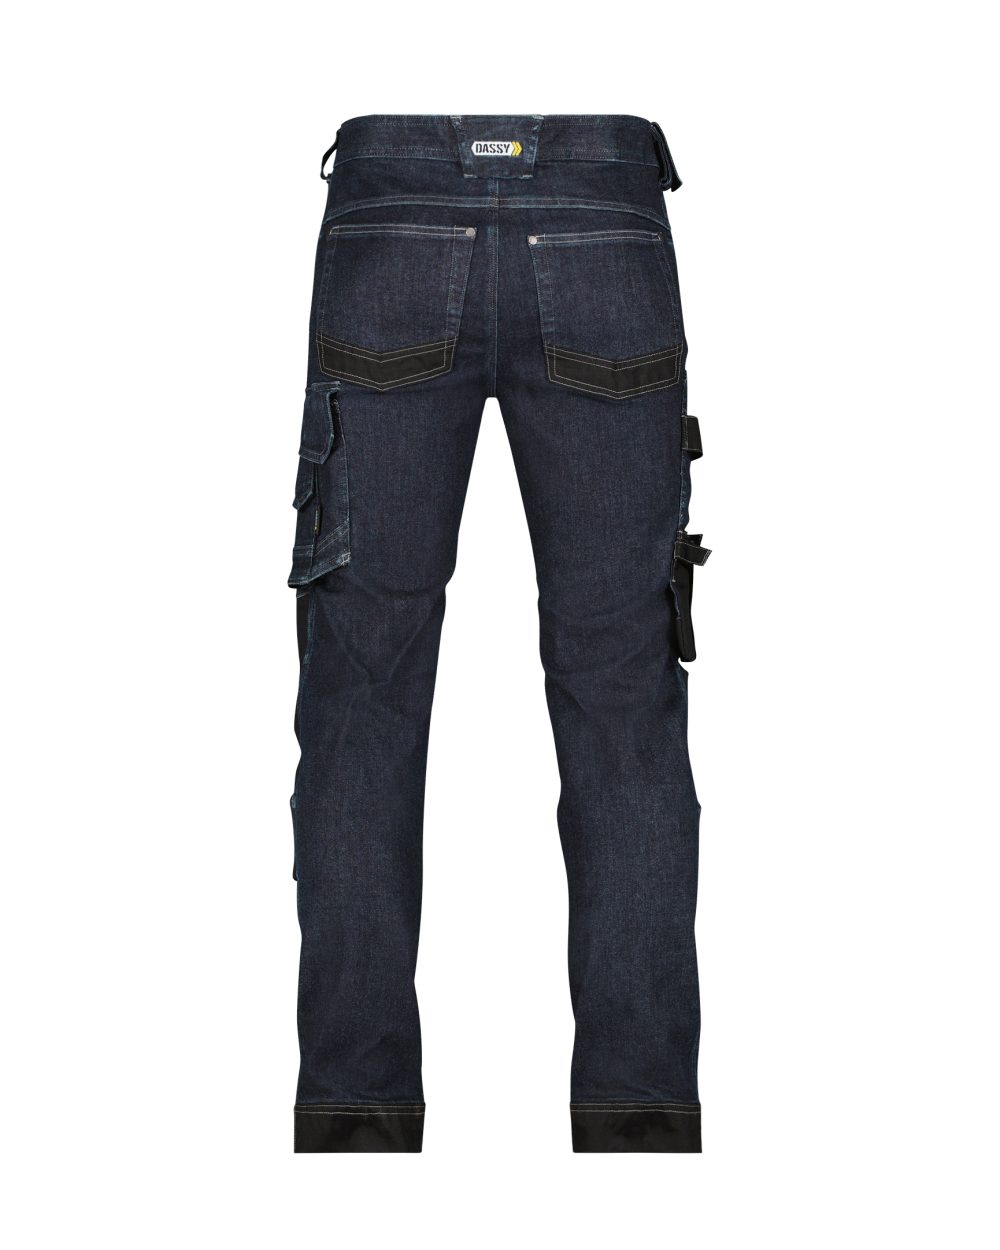 Dassy Kyoto Jeans Work Trousers